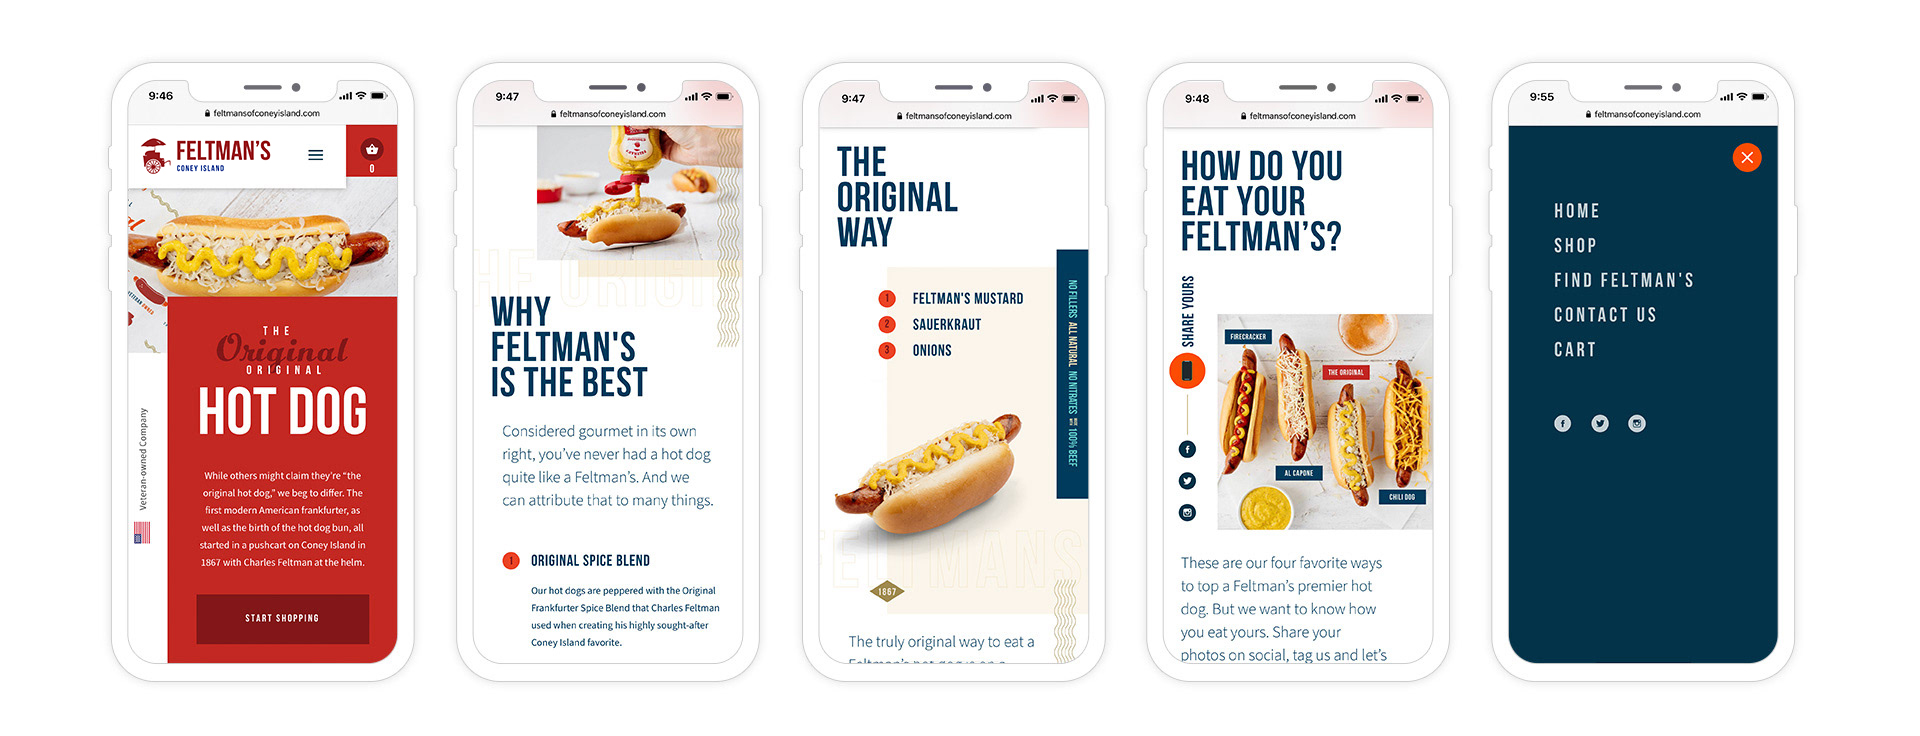 Feltman's of Coney Island Website Pages on a Mobile Phone